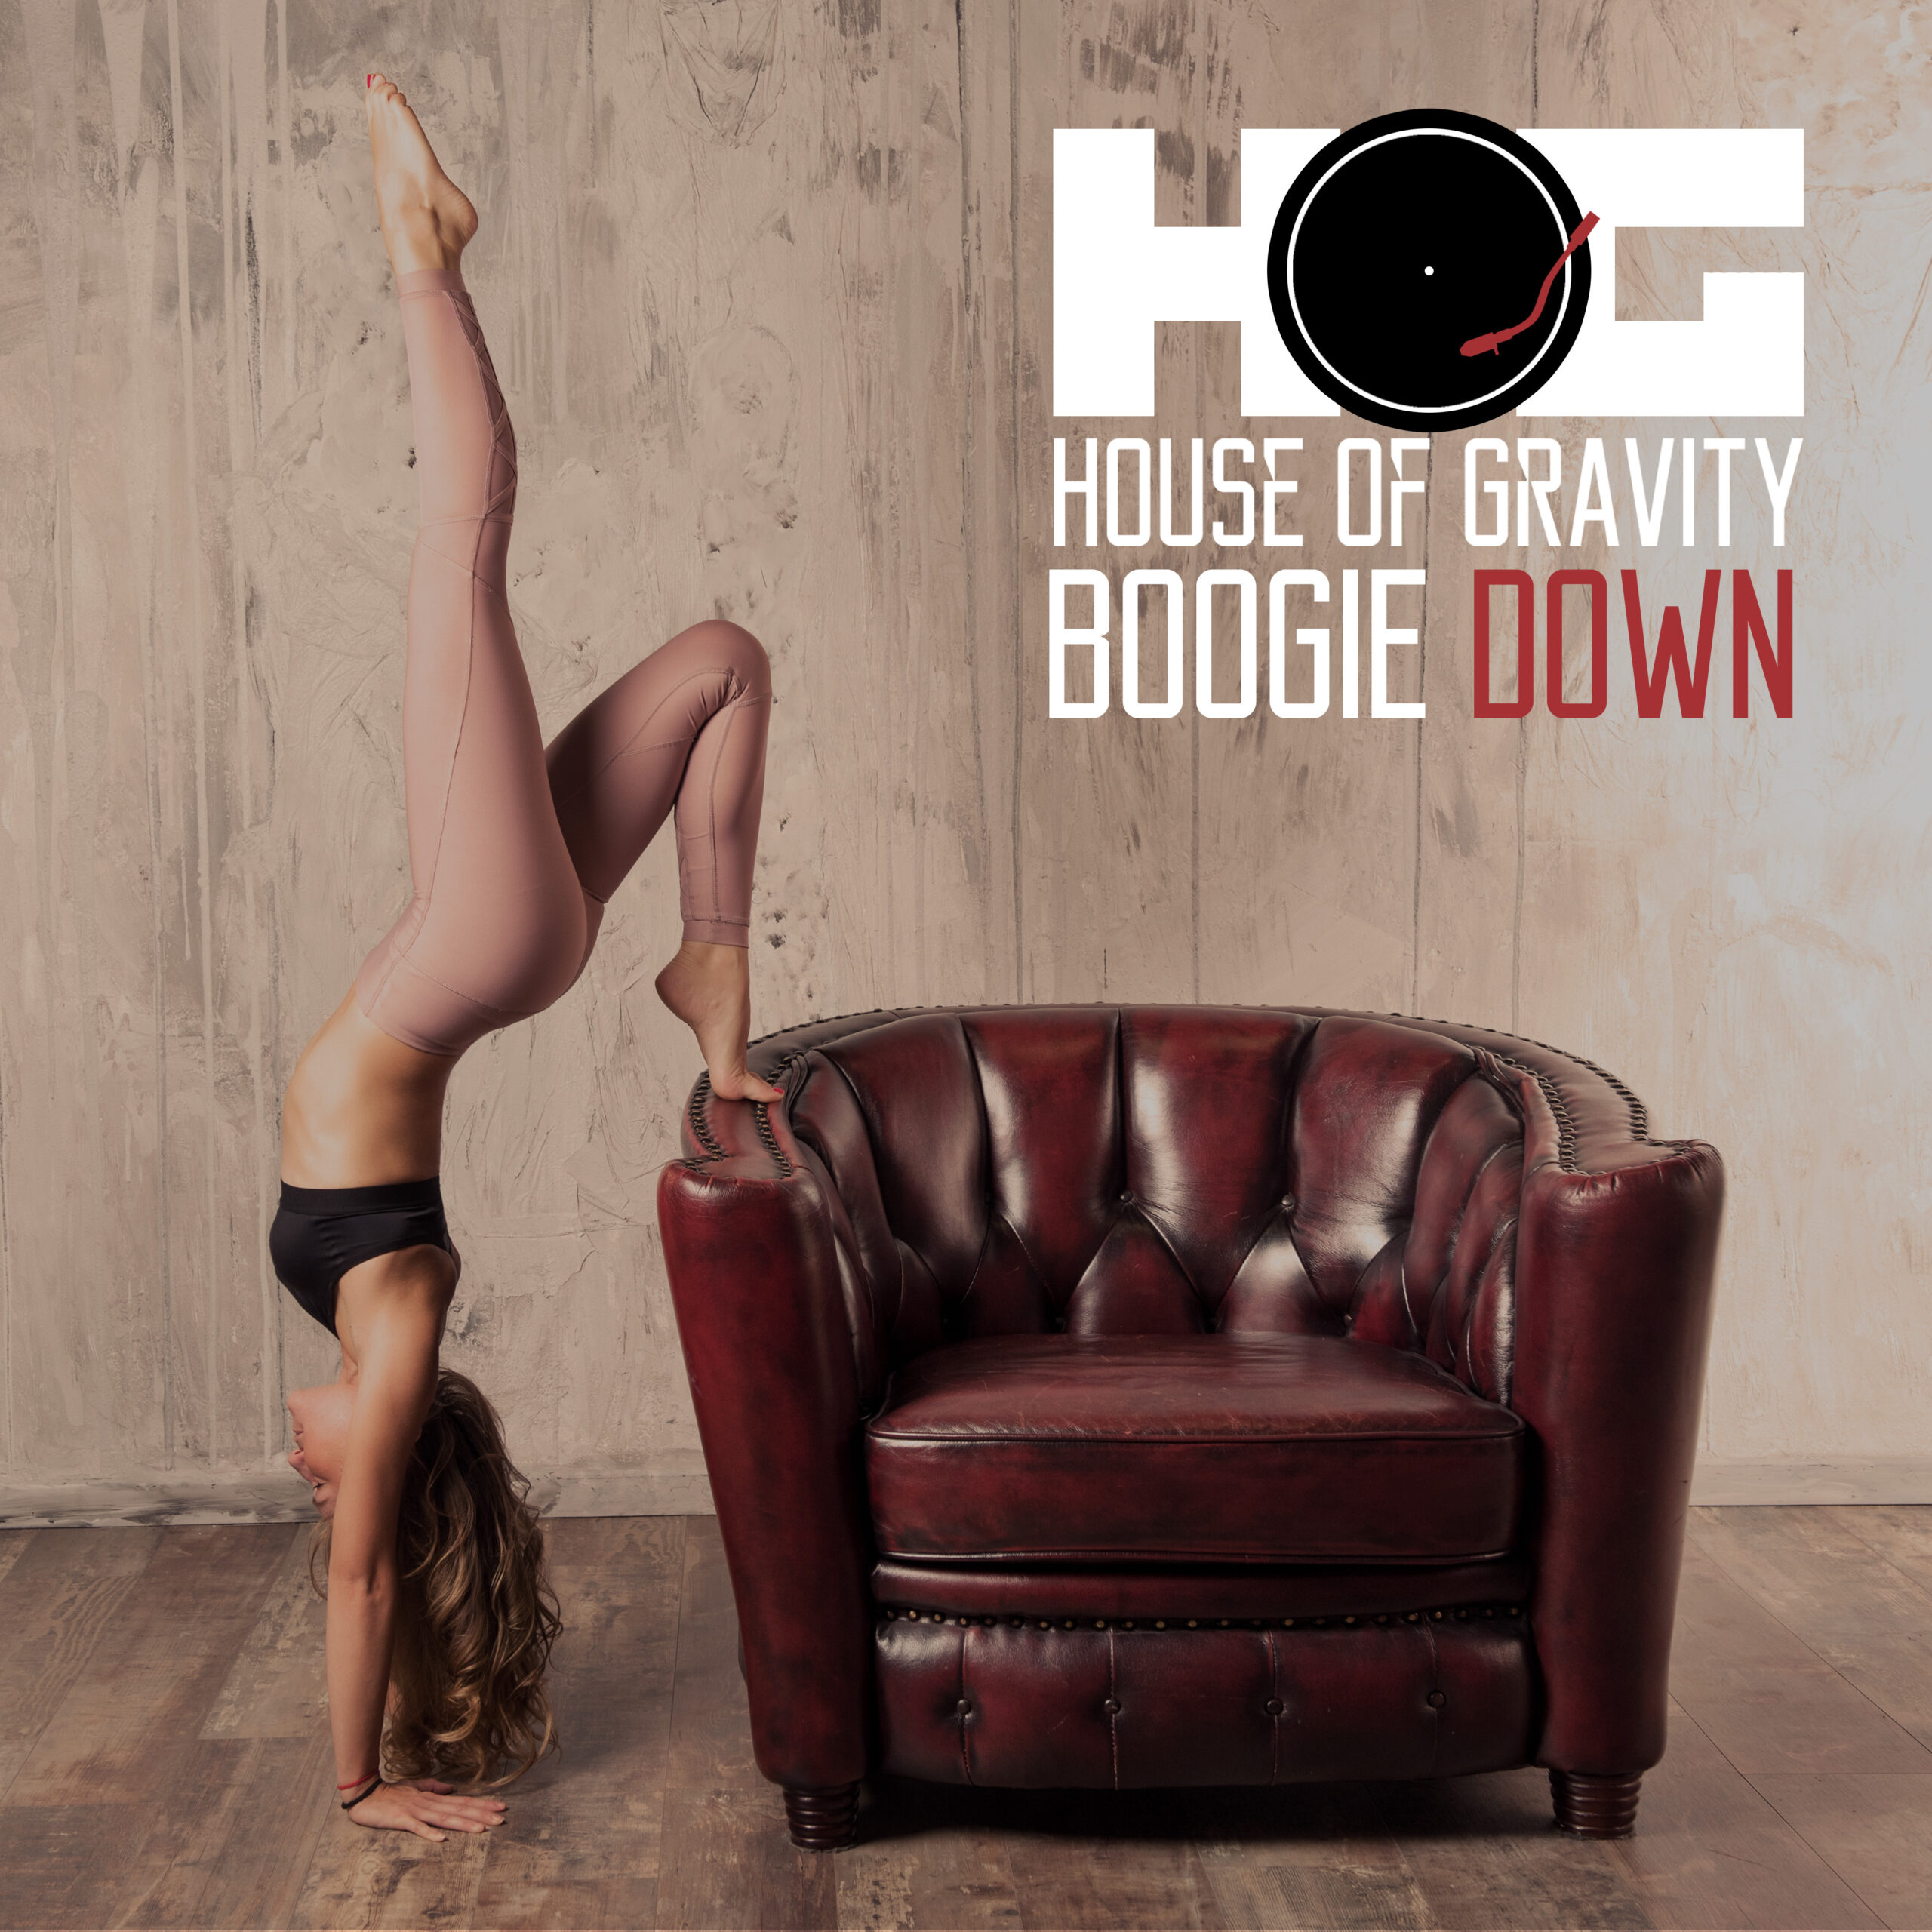 Boogie Down by House of Gravity